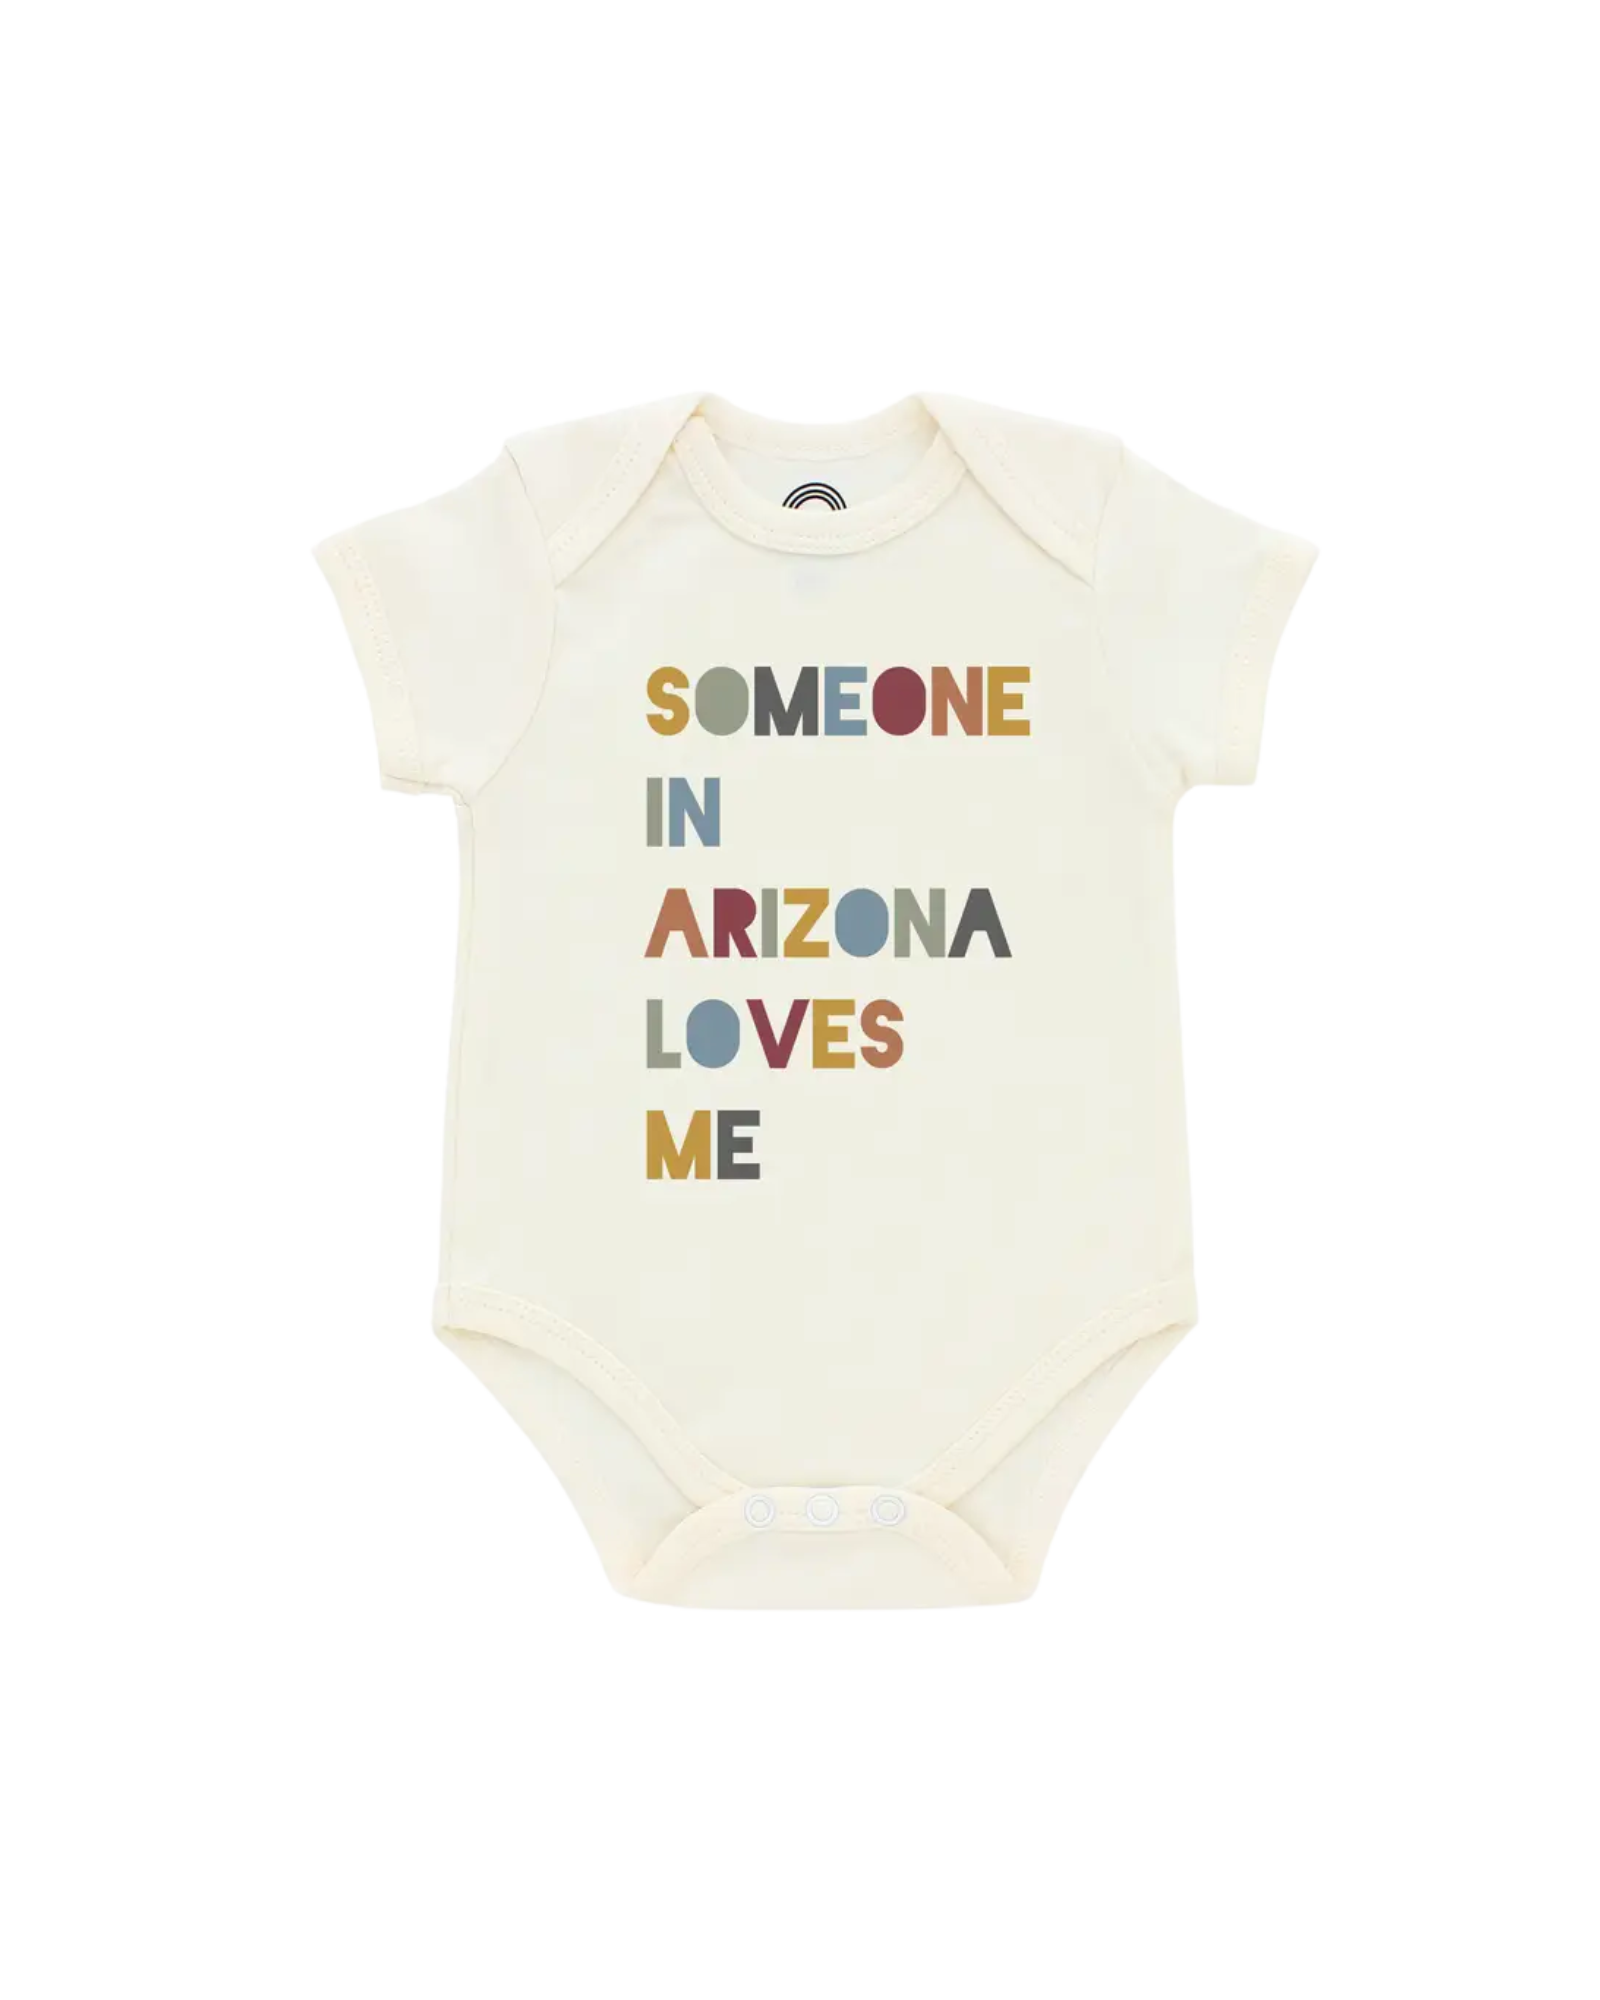 Cream onesie with the words "someone in arizona loves me"